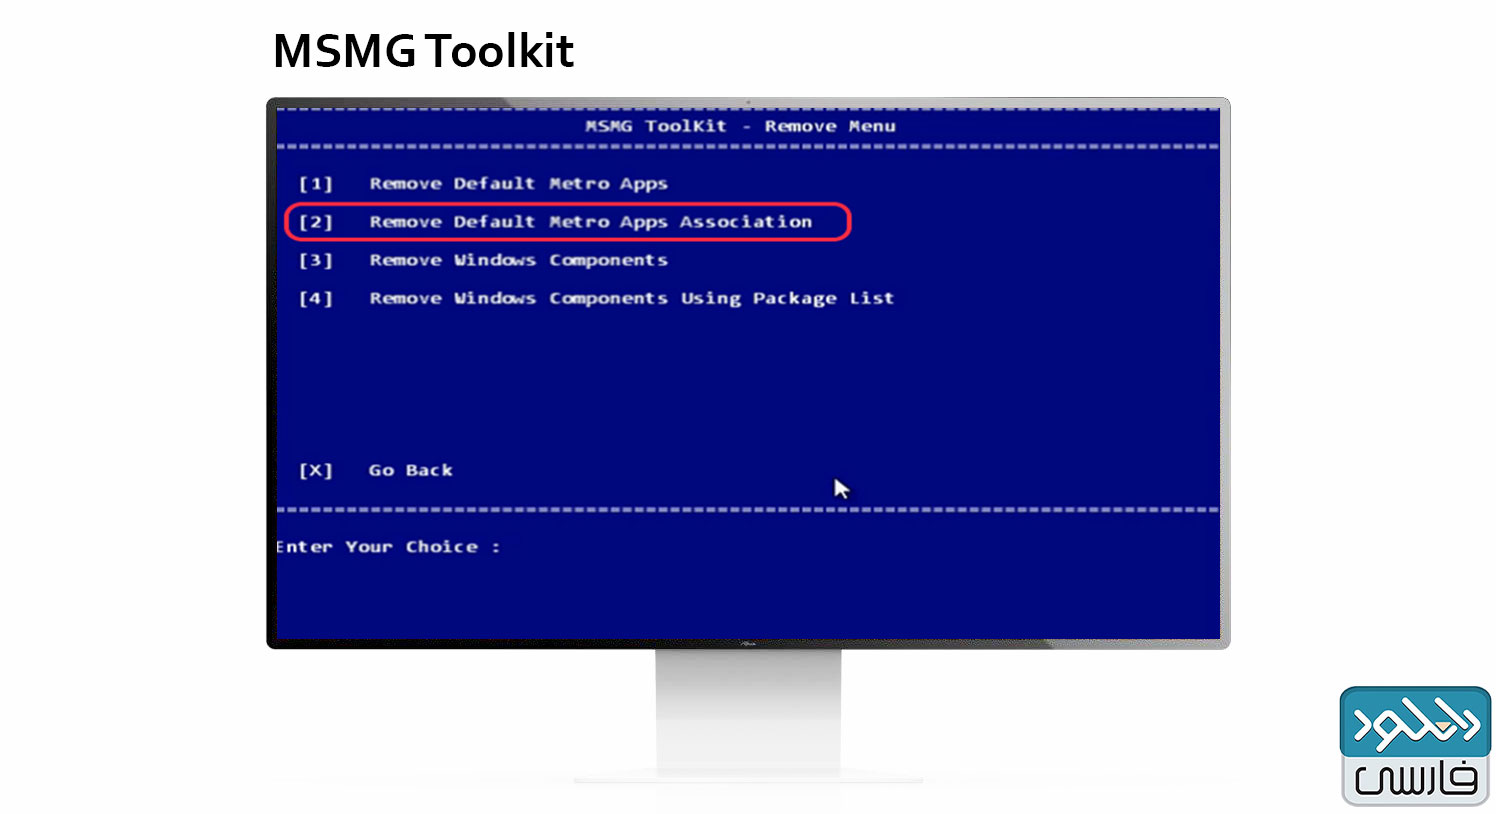 MSMG ToolKit